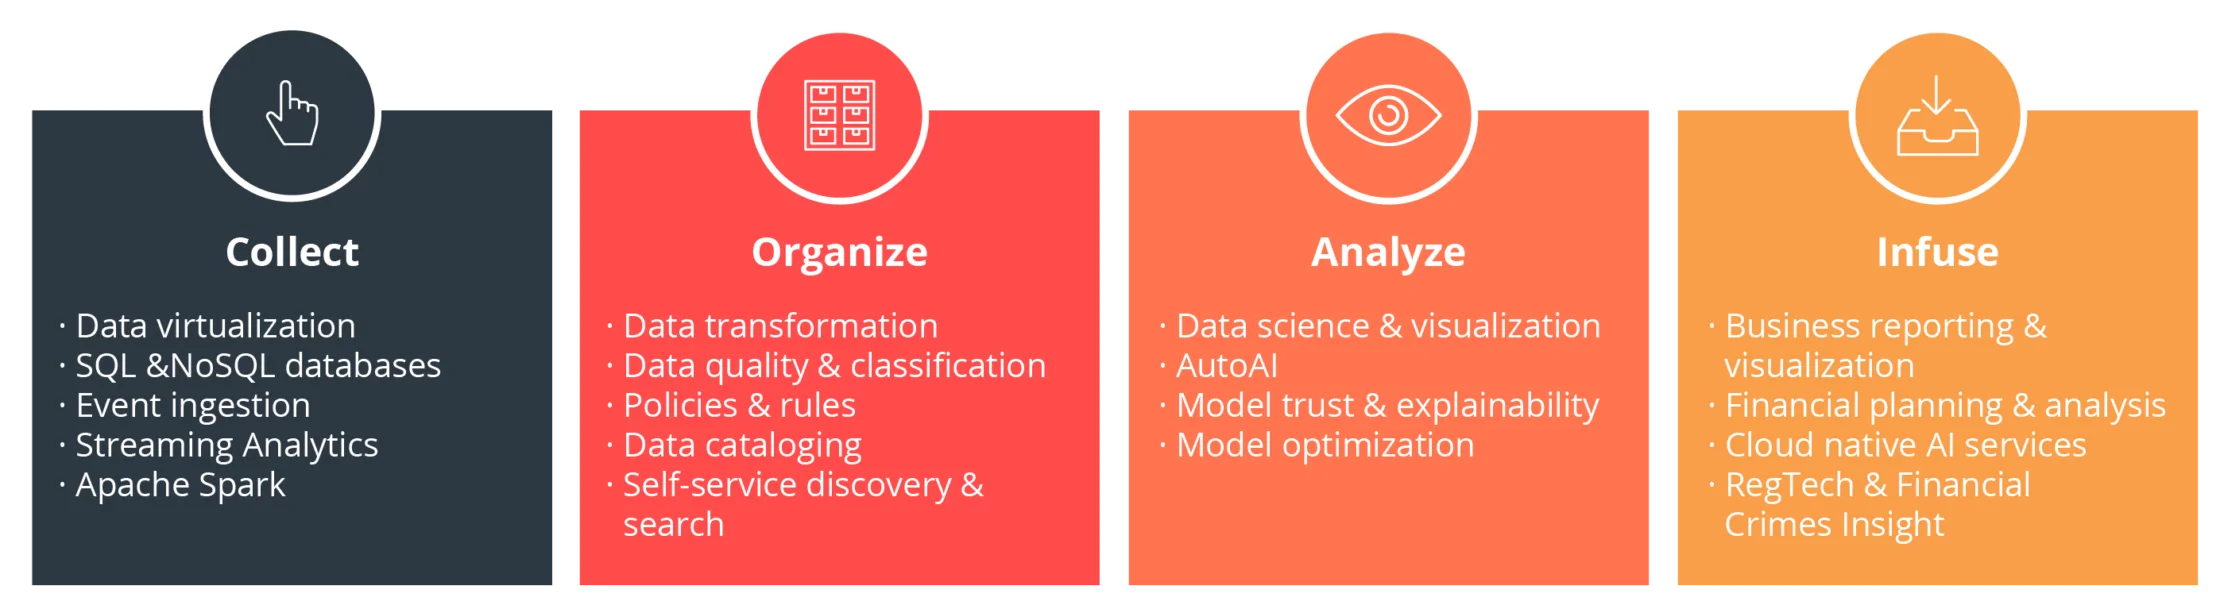 The four phases of data analysis using machine learning and artificial intelligence at a glance (source: IBM)